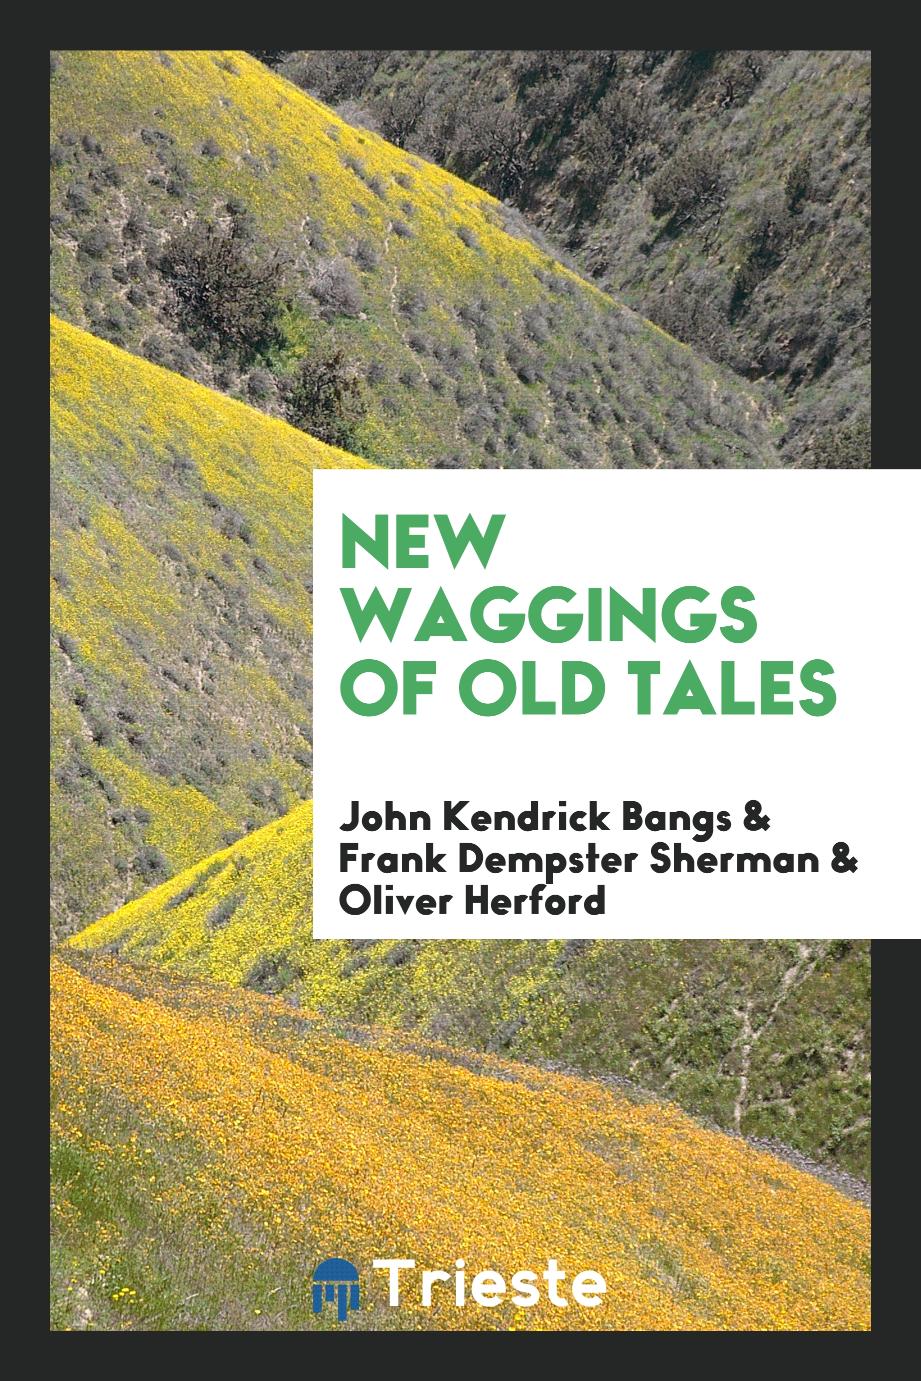 New waggings of old tales